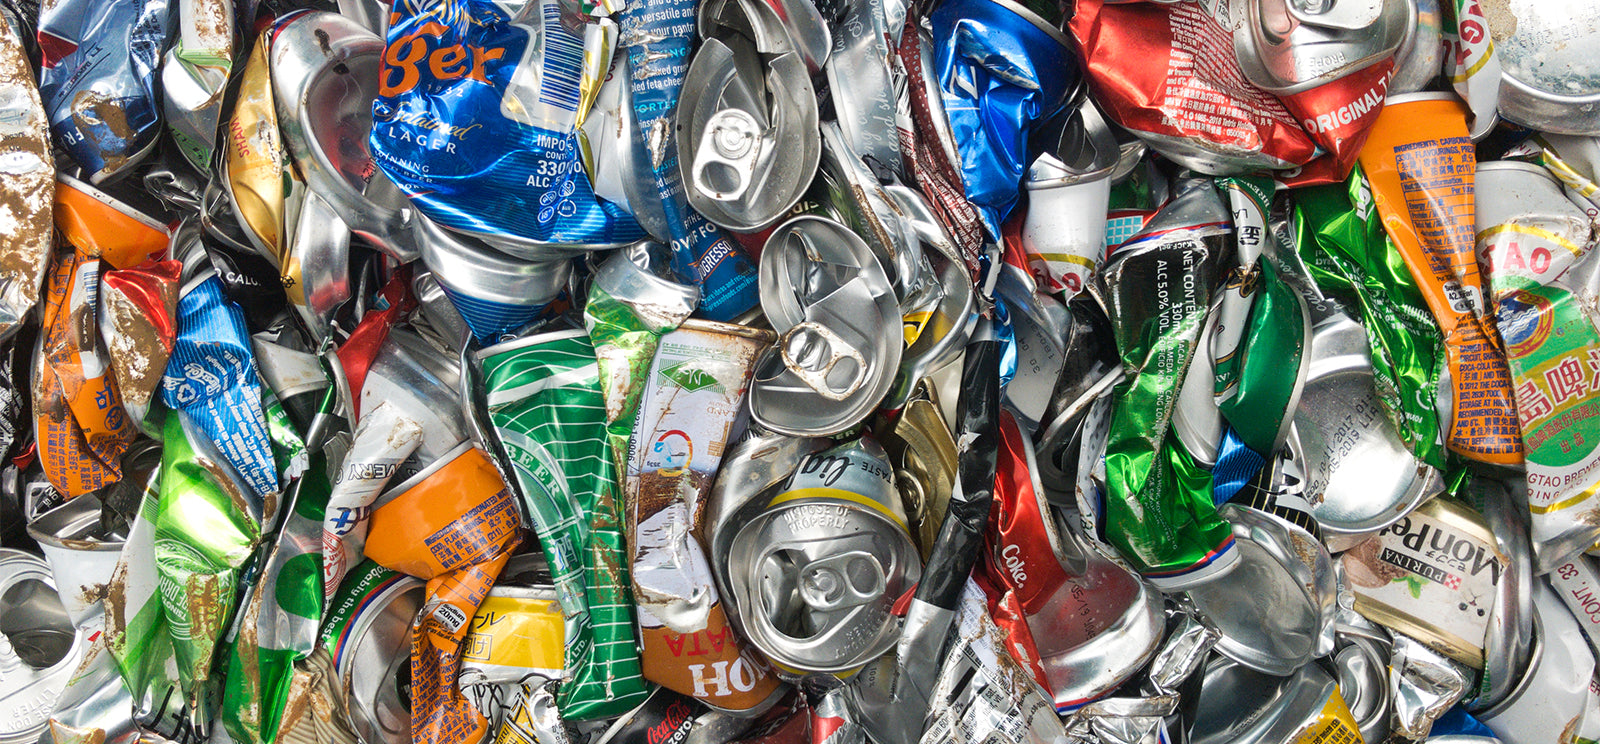 Aluminum is One of the Most Widely Recycled Materials Out There